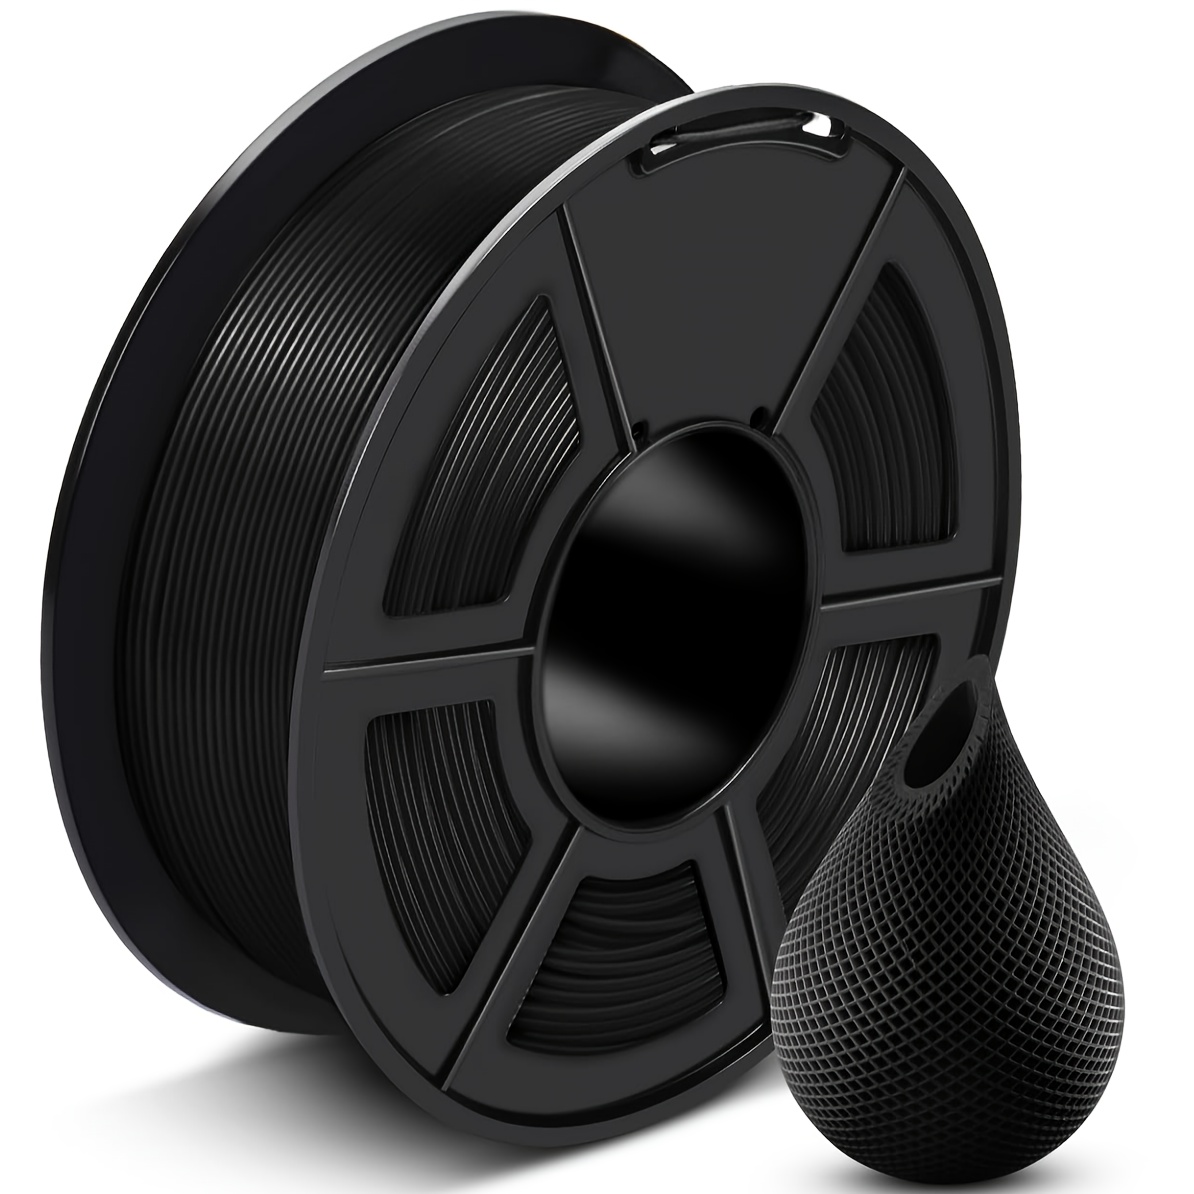 

Sunlu High-toughness Petg Filament - 1.75mm, Low Stringing & Strong Layer Adhesion, Durable & Weather-resistant, Easy Print Black Petg, 2.2lbs Spool